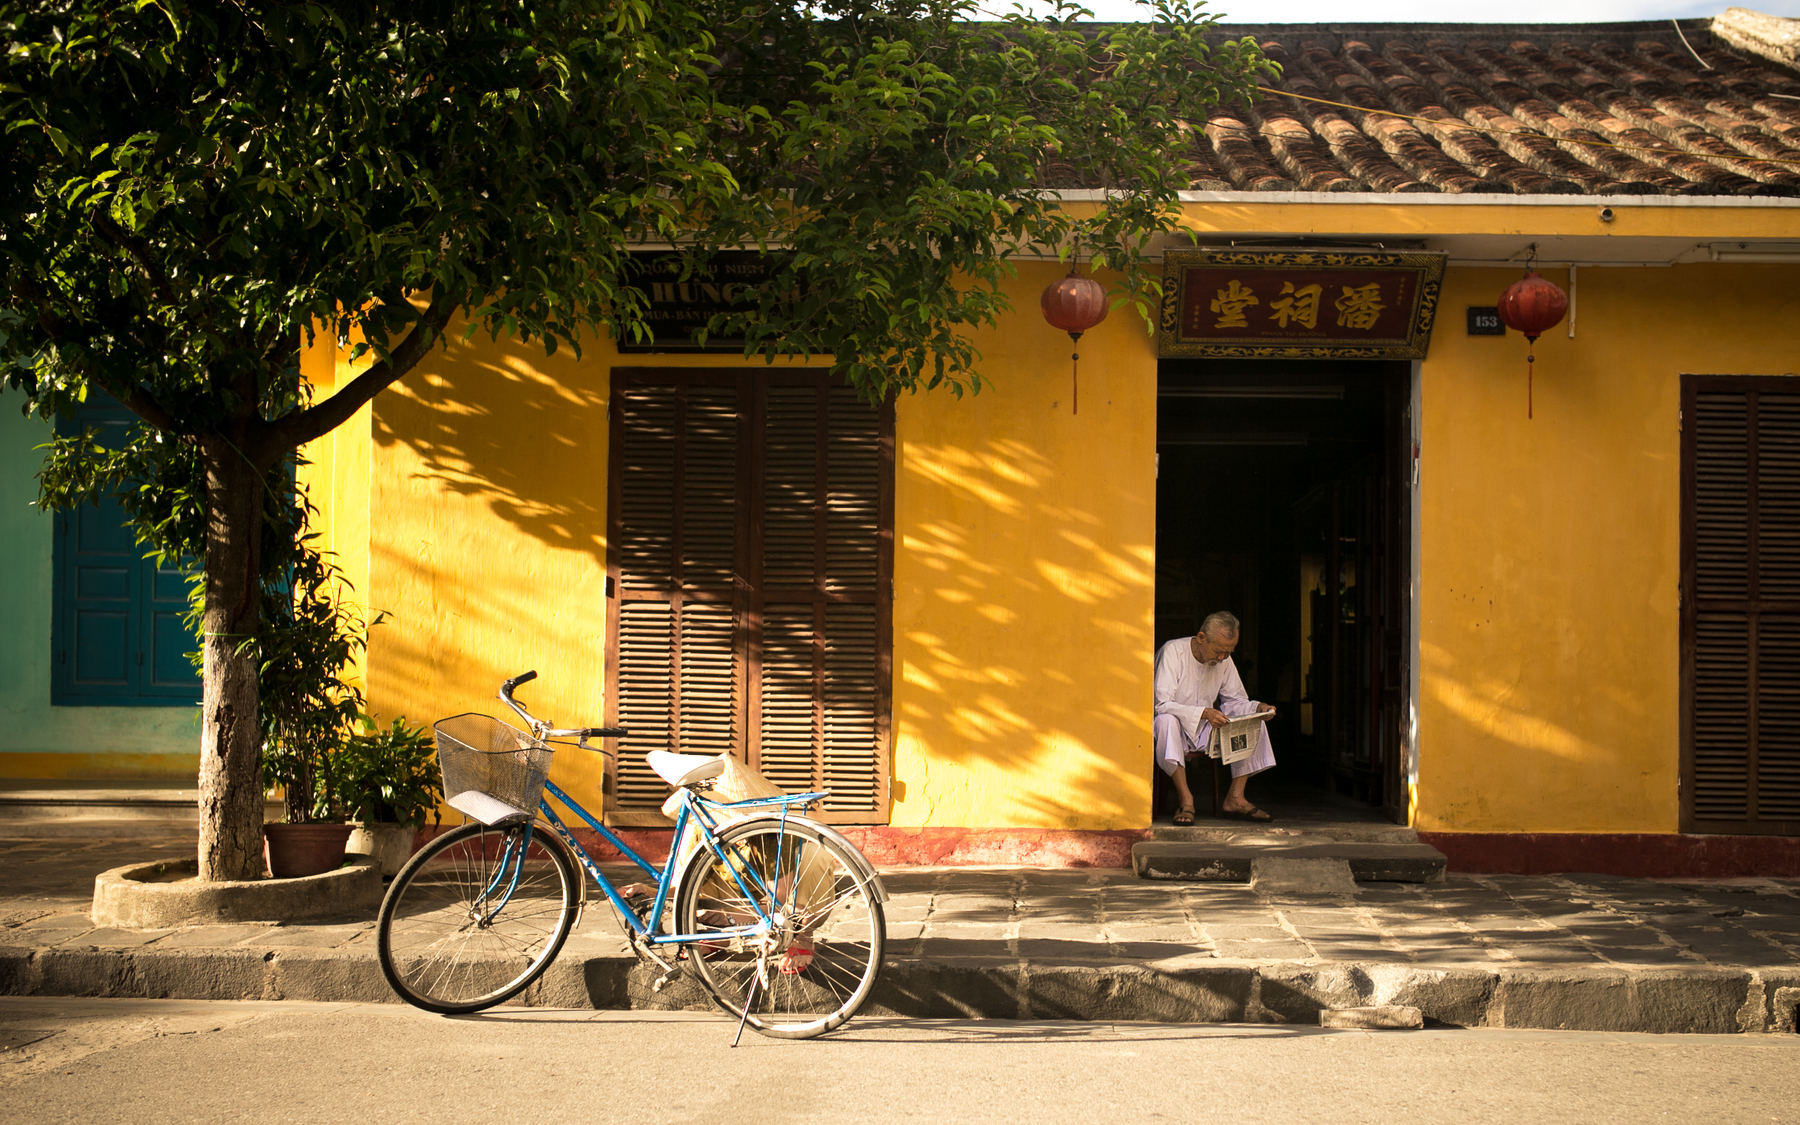 A bicycle outside a yellow house in China